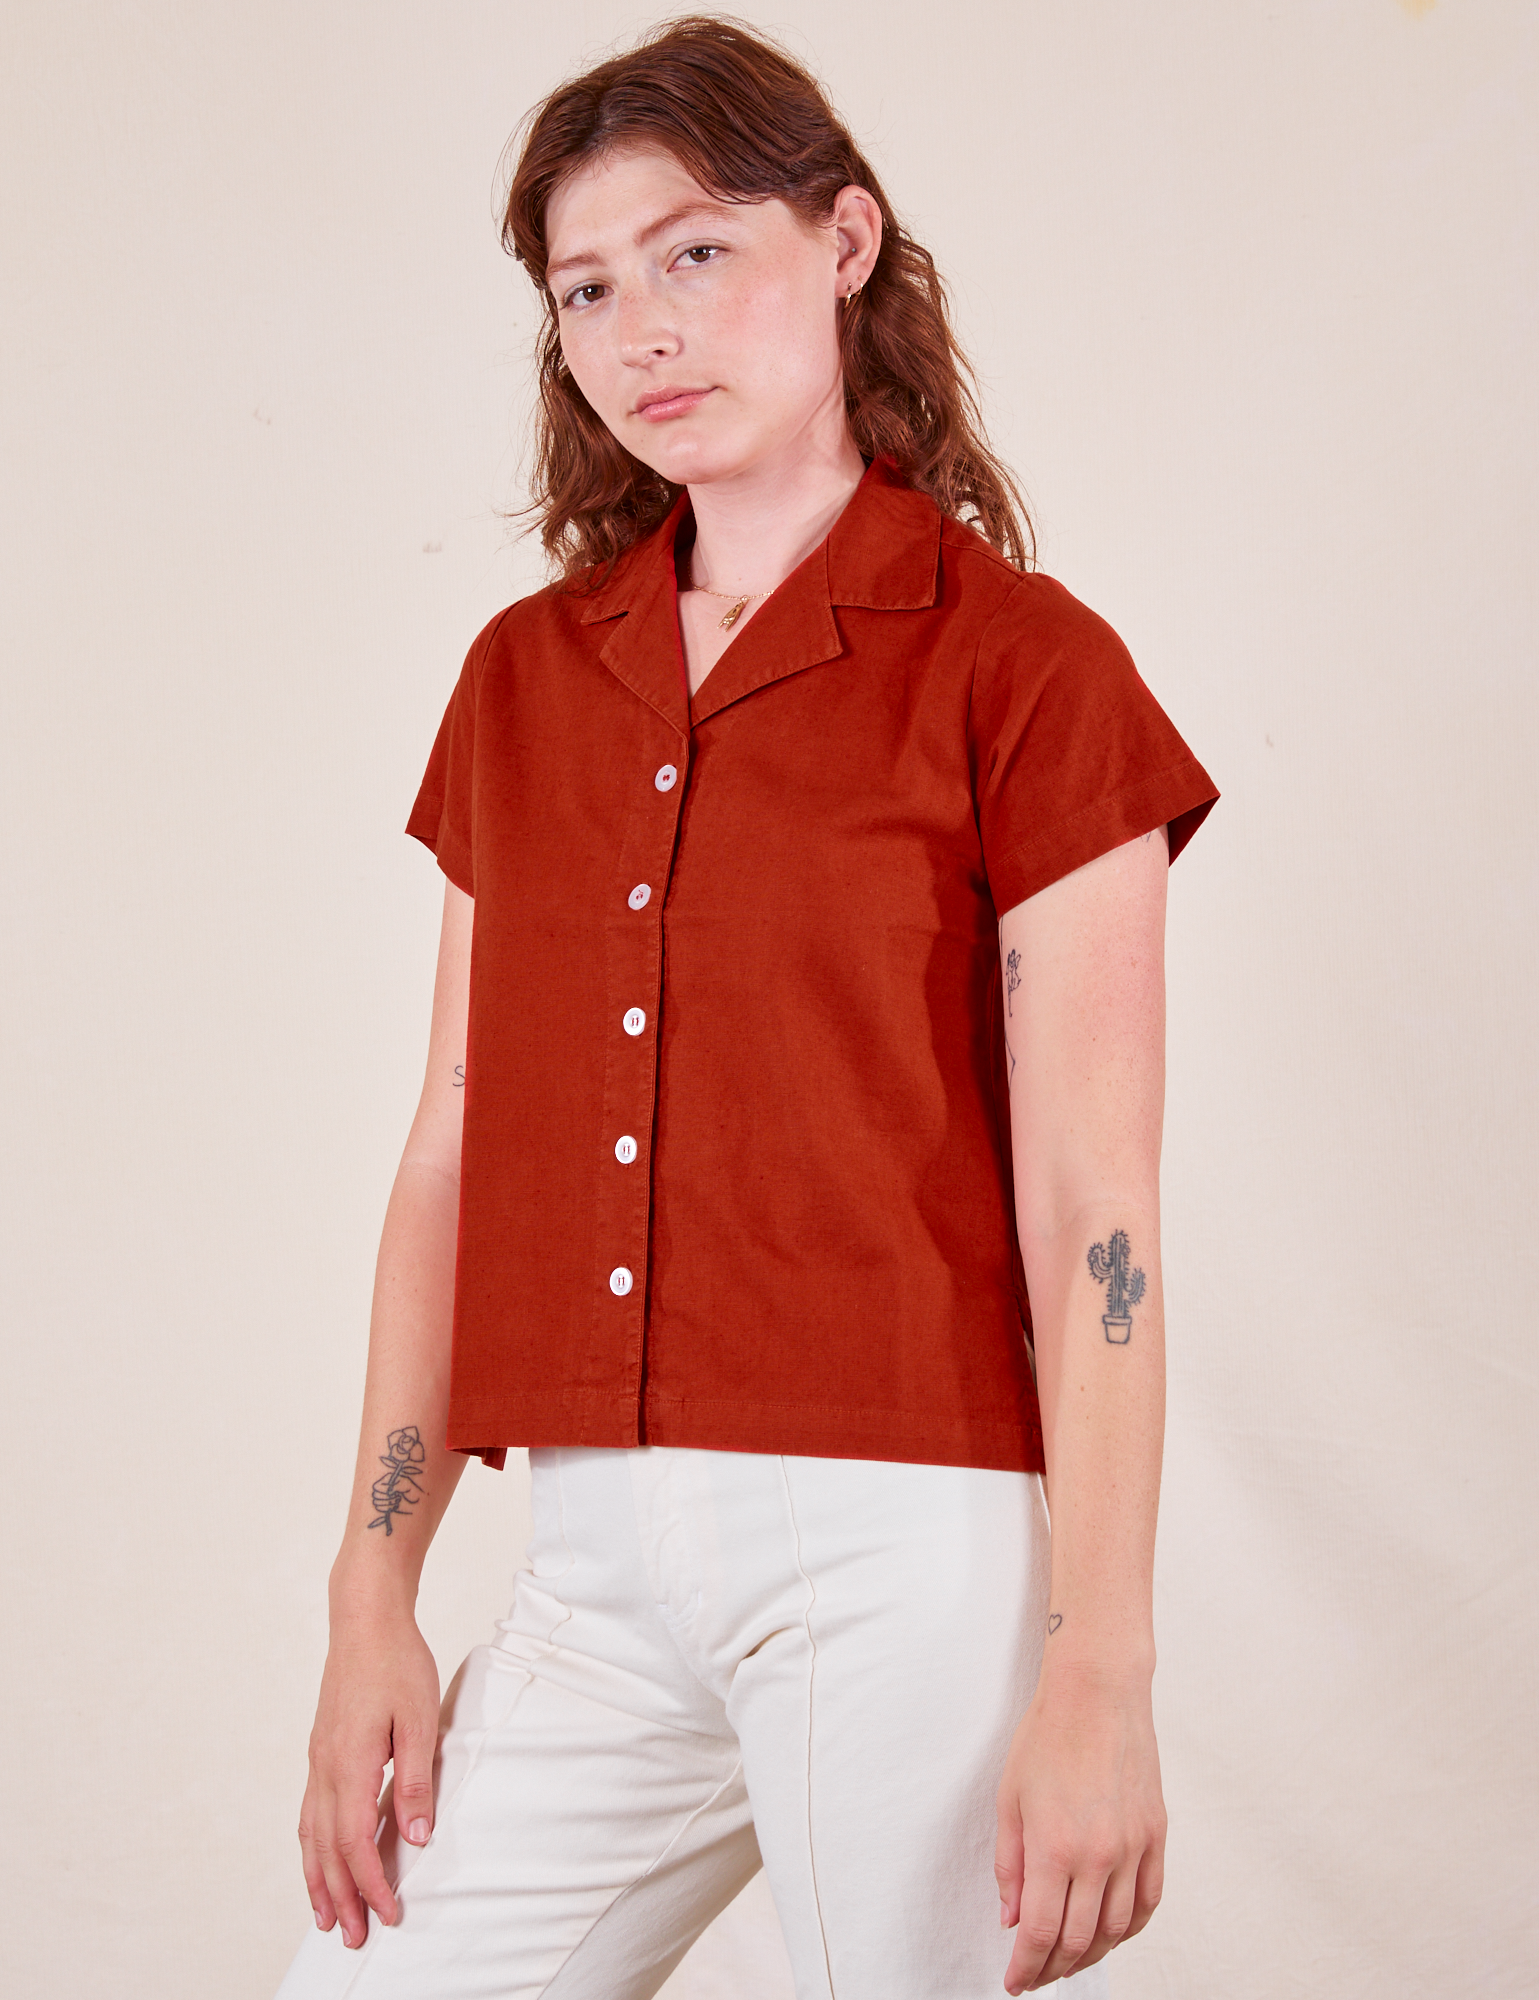 Alex is wearing Pantry Button-Up in Paprika